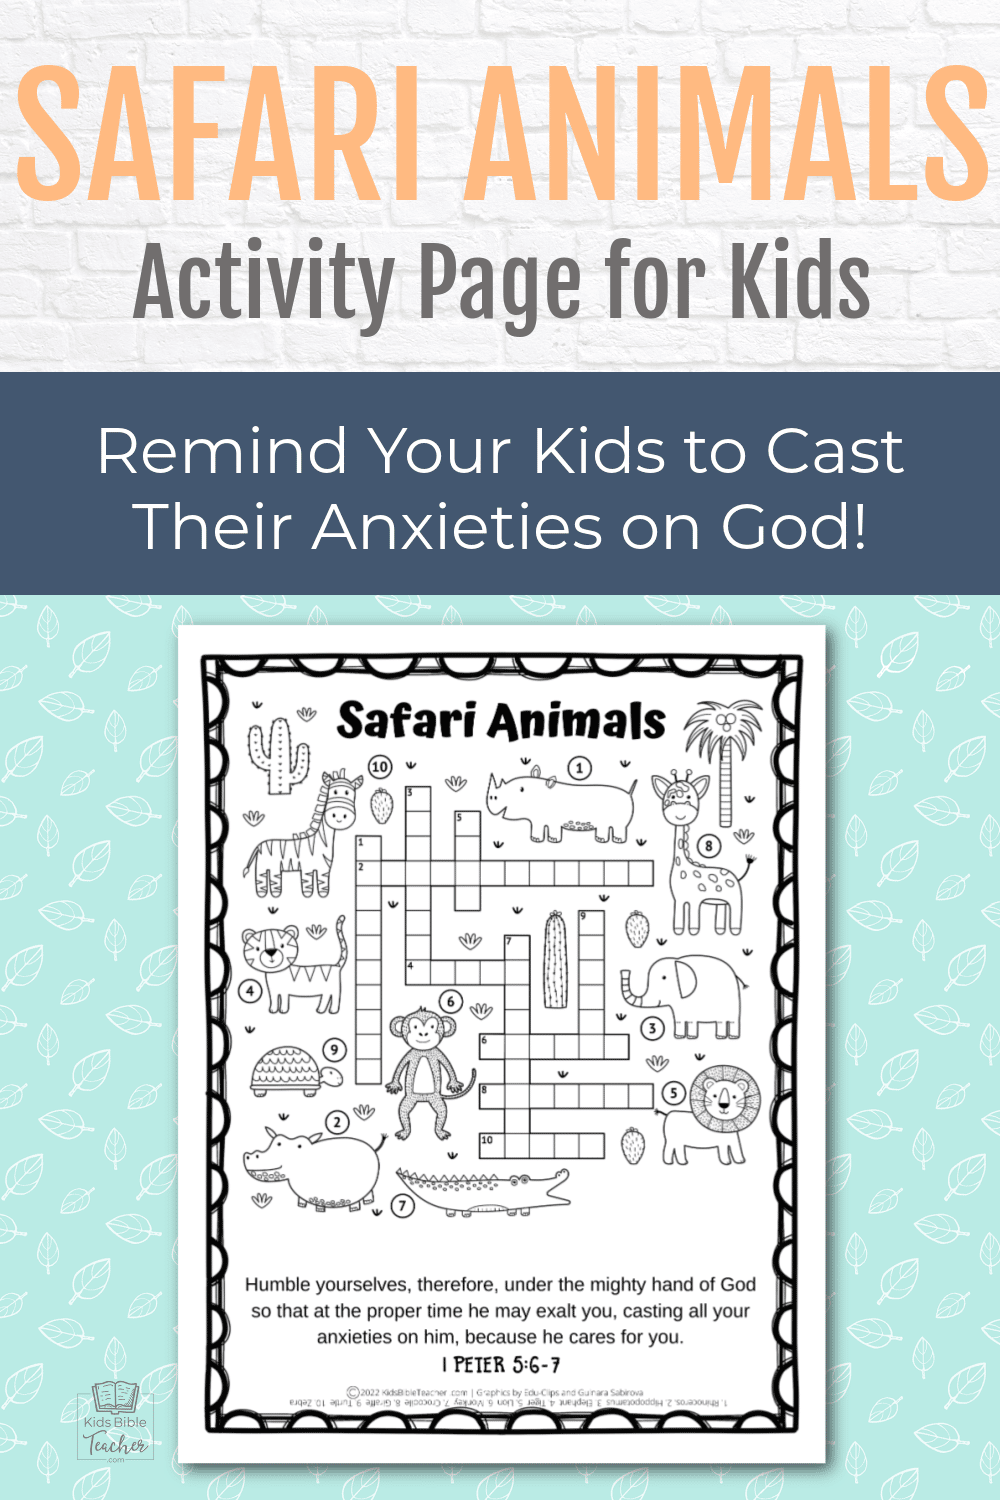 The free printable Safari Animals Activity Page is a great way to supplement any Sunday School or Bible class! Get your copy today.